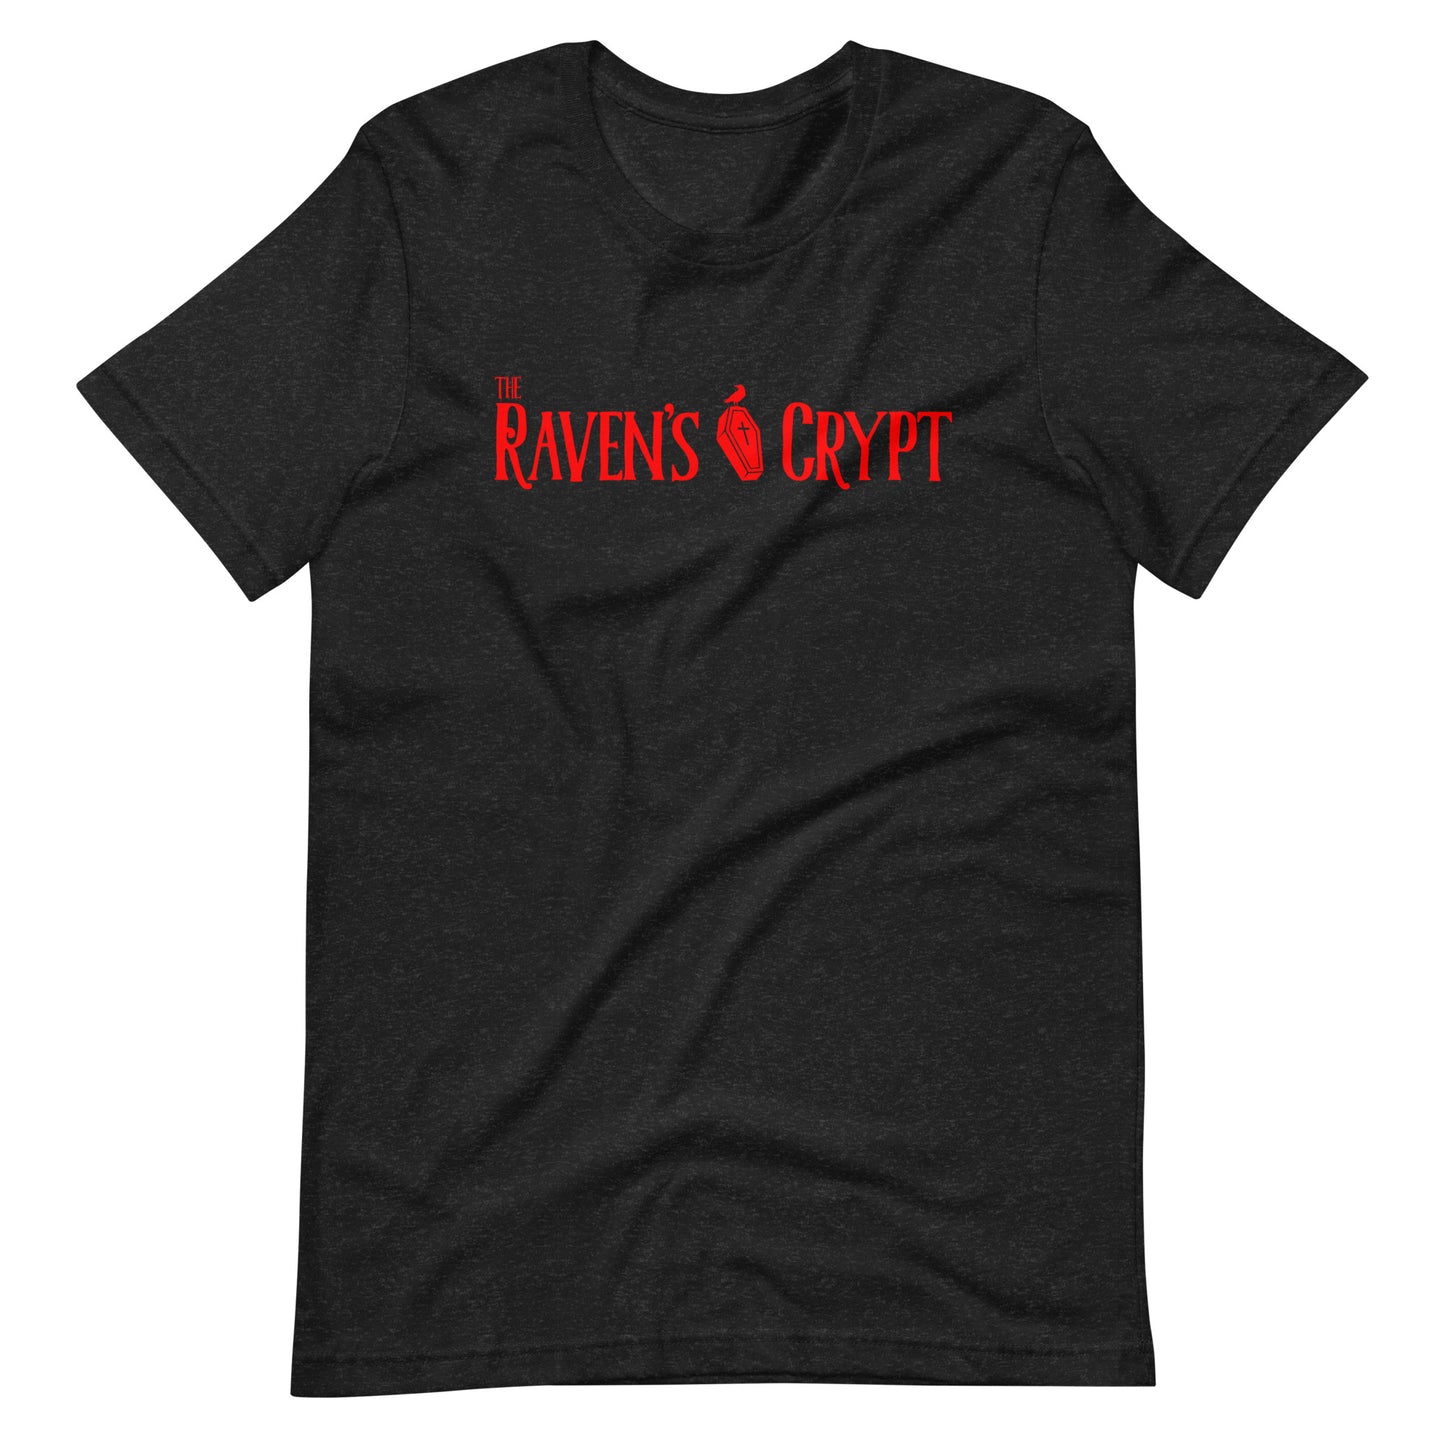 The Raven's Crypt Red Logo - Unisex t-shirt - Black Heather Front